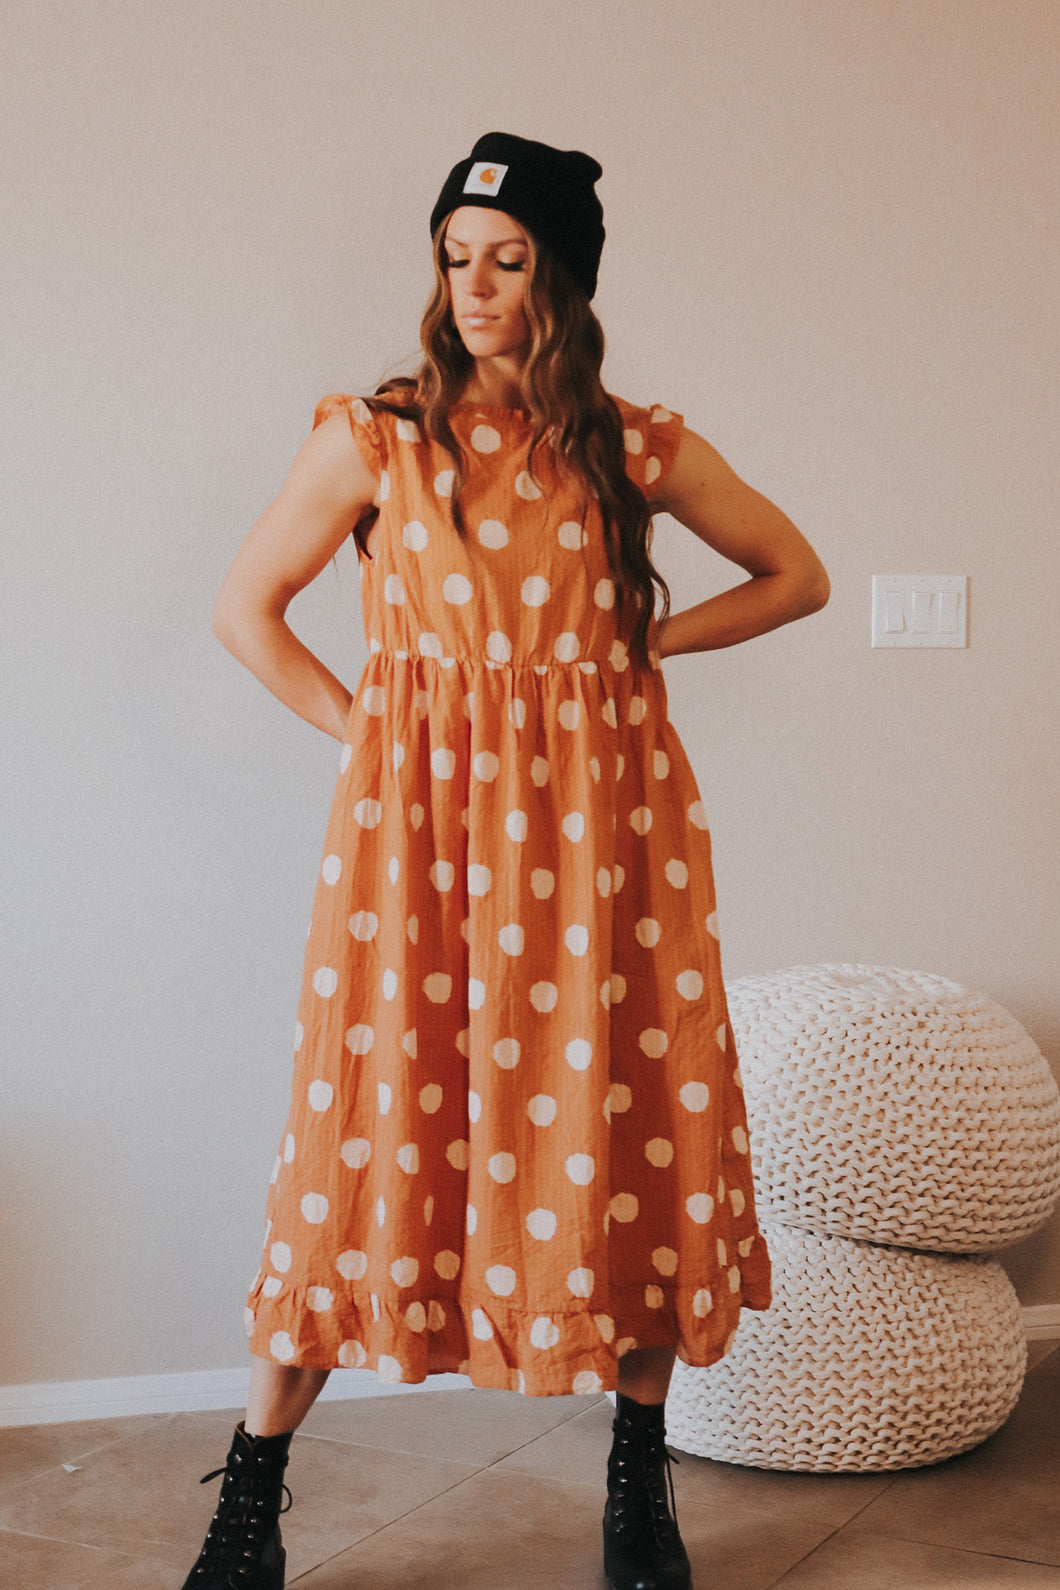 Roolee Polka dot dress + extended sizing!